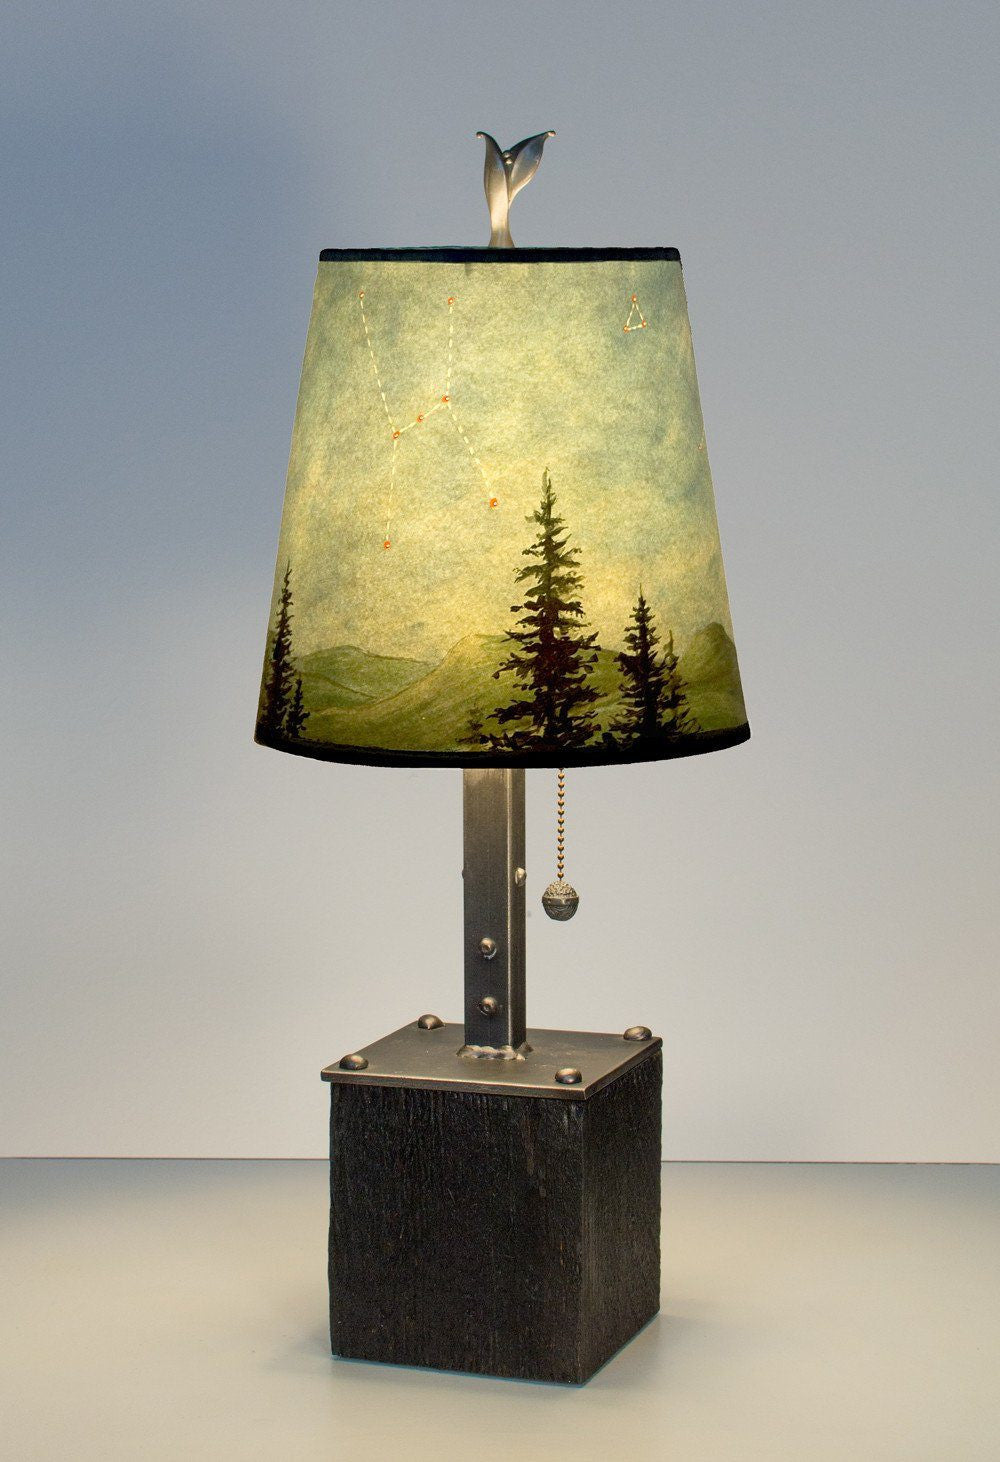 Steel Table Lamp on Reclaimed Wood with Small Drum Shade in Midnight Sky